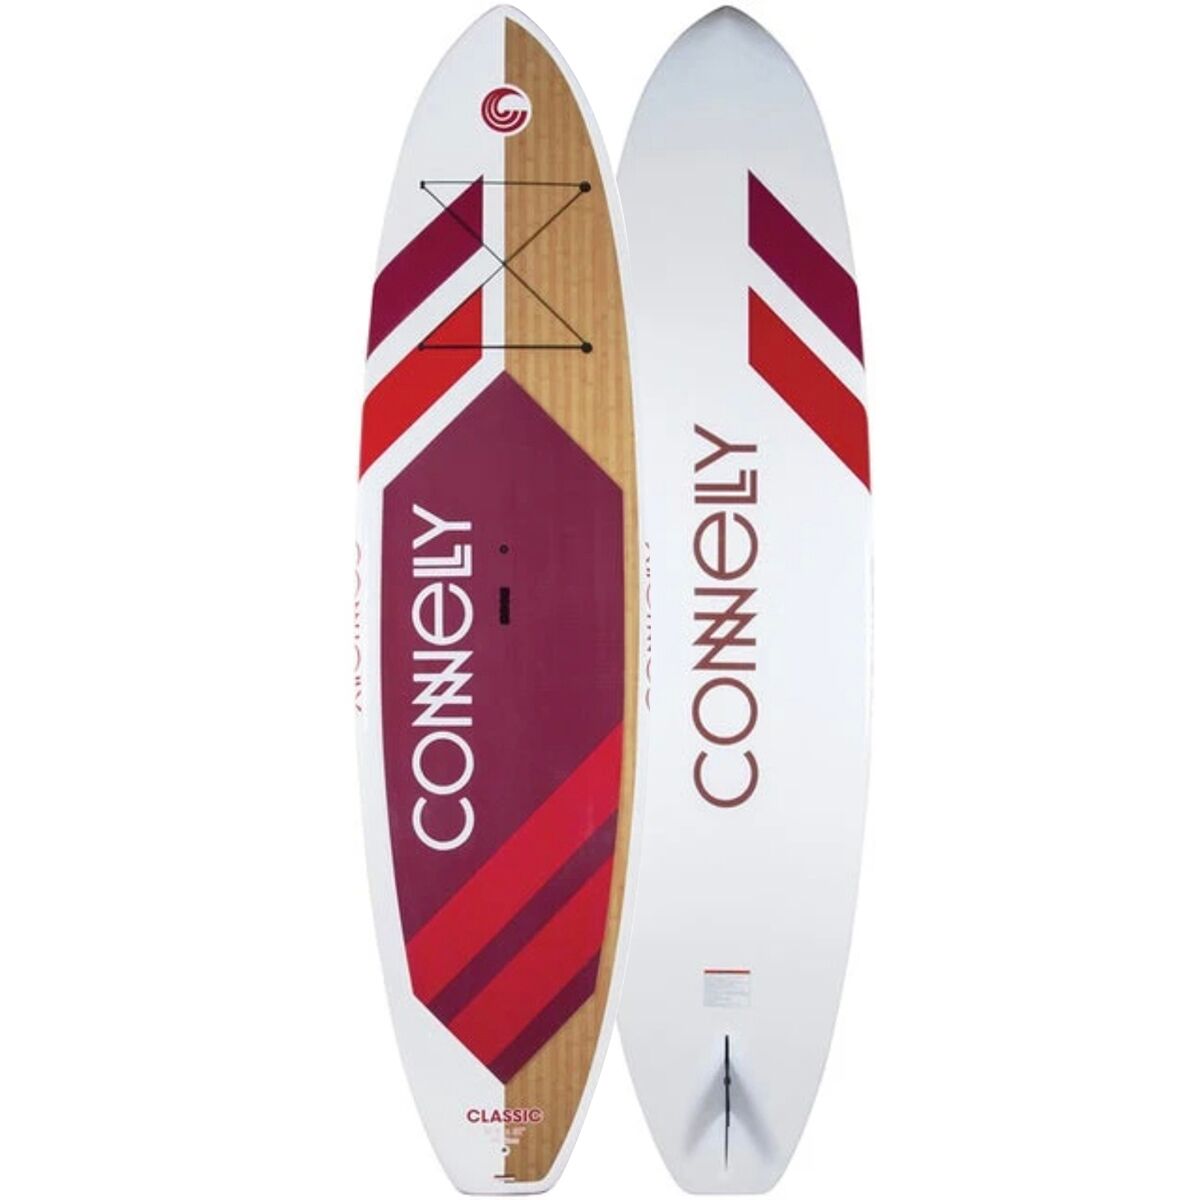 Connelly Skis Classic Stand-Up Paddleboard + Paddle